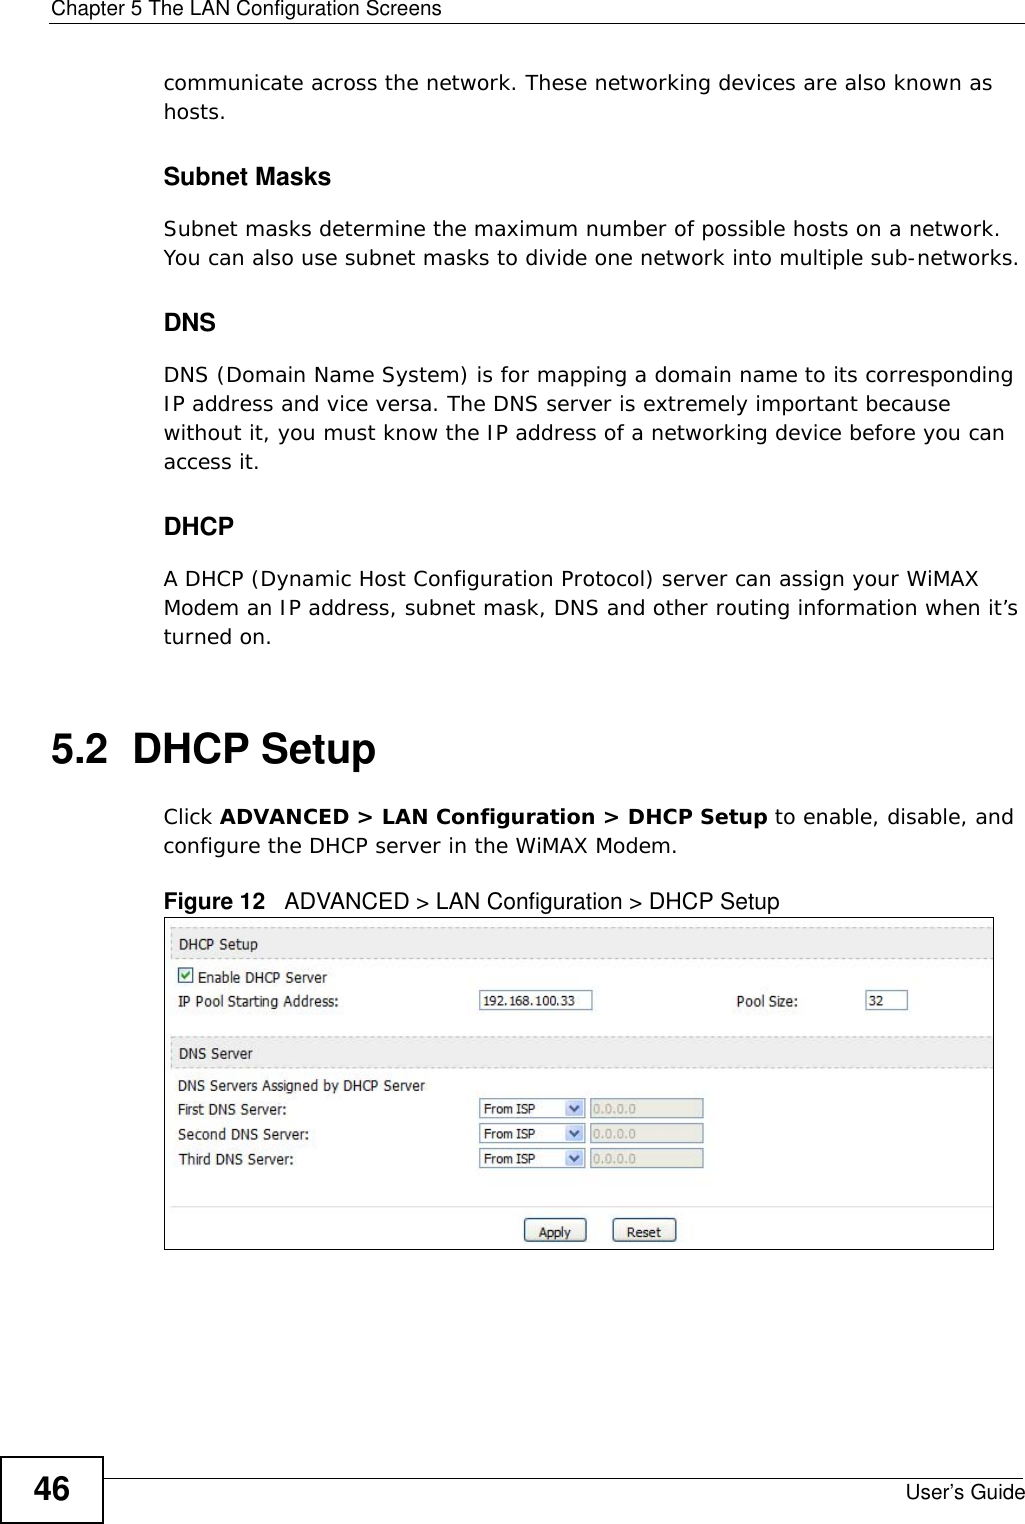 Chapter 5 The LAN Configuration ScreensUser’s Guide46communicate across the network. These networking devices are also known as hosts.Subnet MasksSubnet masks determine the maximum number of possible hosts on a network. You can also use subnet masks to divide one network into multiple sub-networks.DNSDNS (Domain Name System) is for mapping a domain name to its corresponding IP address and vice versa. The DNS server is extremely important because without it, you must know the IP address of a networking device before you can access it.DHCPA DHCP (Dynamic Host Configuration Protocol) server can assign your WiMAX Modem an IP address, subnet mask, DNS and other routing information when it’s turned on.5.2  DHCP SetupClick ADVANCED &gt; LAN Configuration &gt; DHCP Setup to enable, disable, and configure the DHCP server in the WiMAX Modem.Figure 12   ADVANCED &gt; LAN Configuration &gt; DHCP Setup